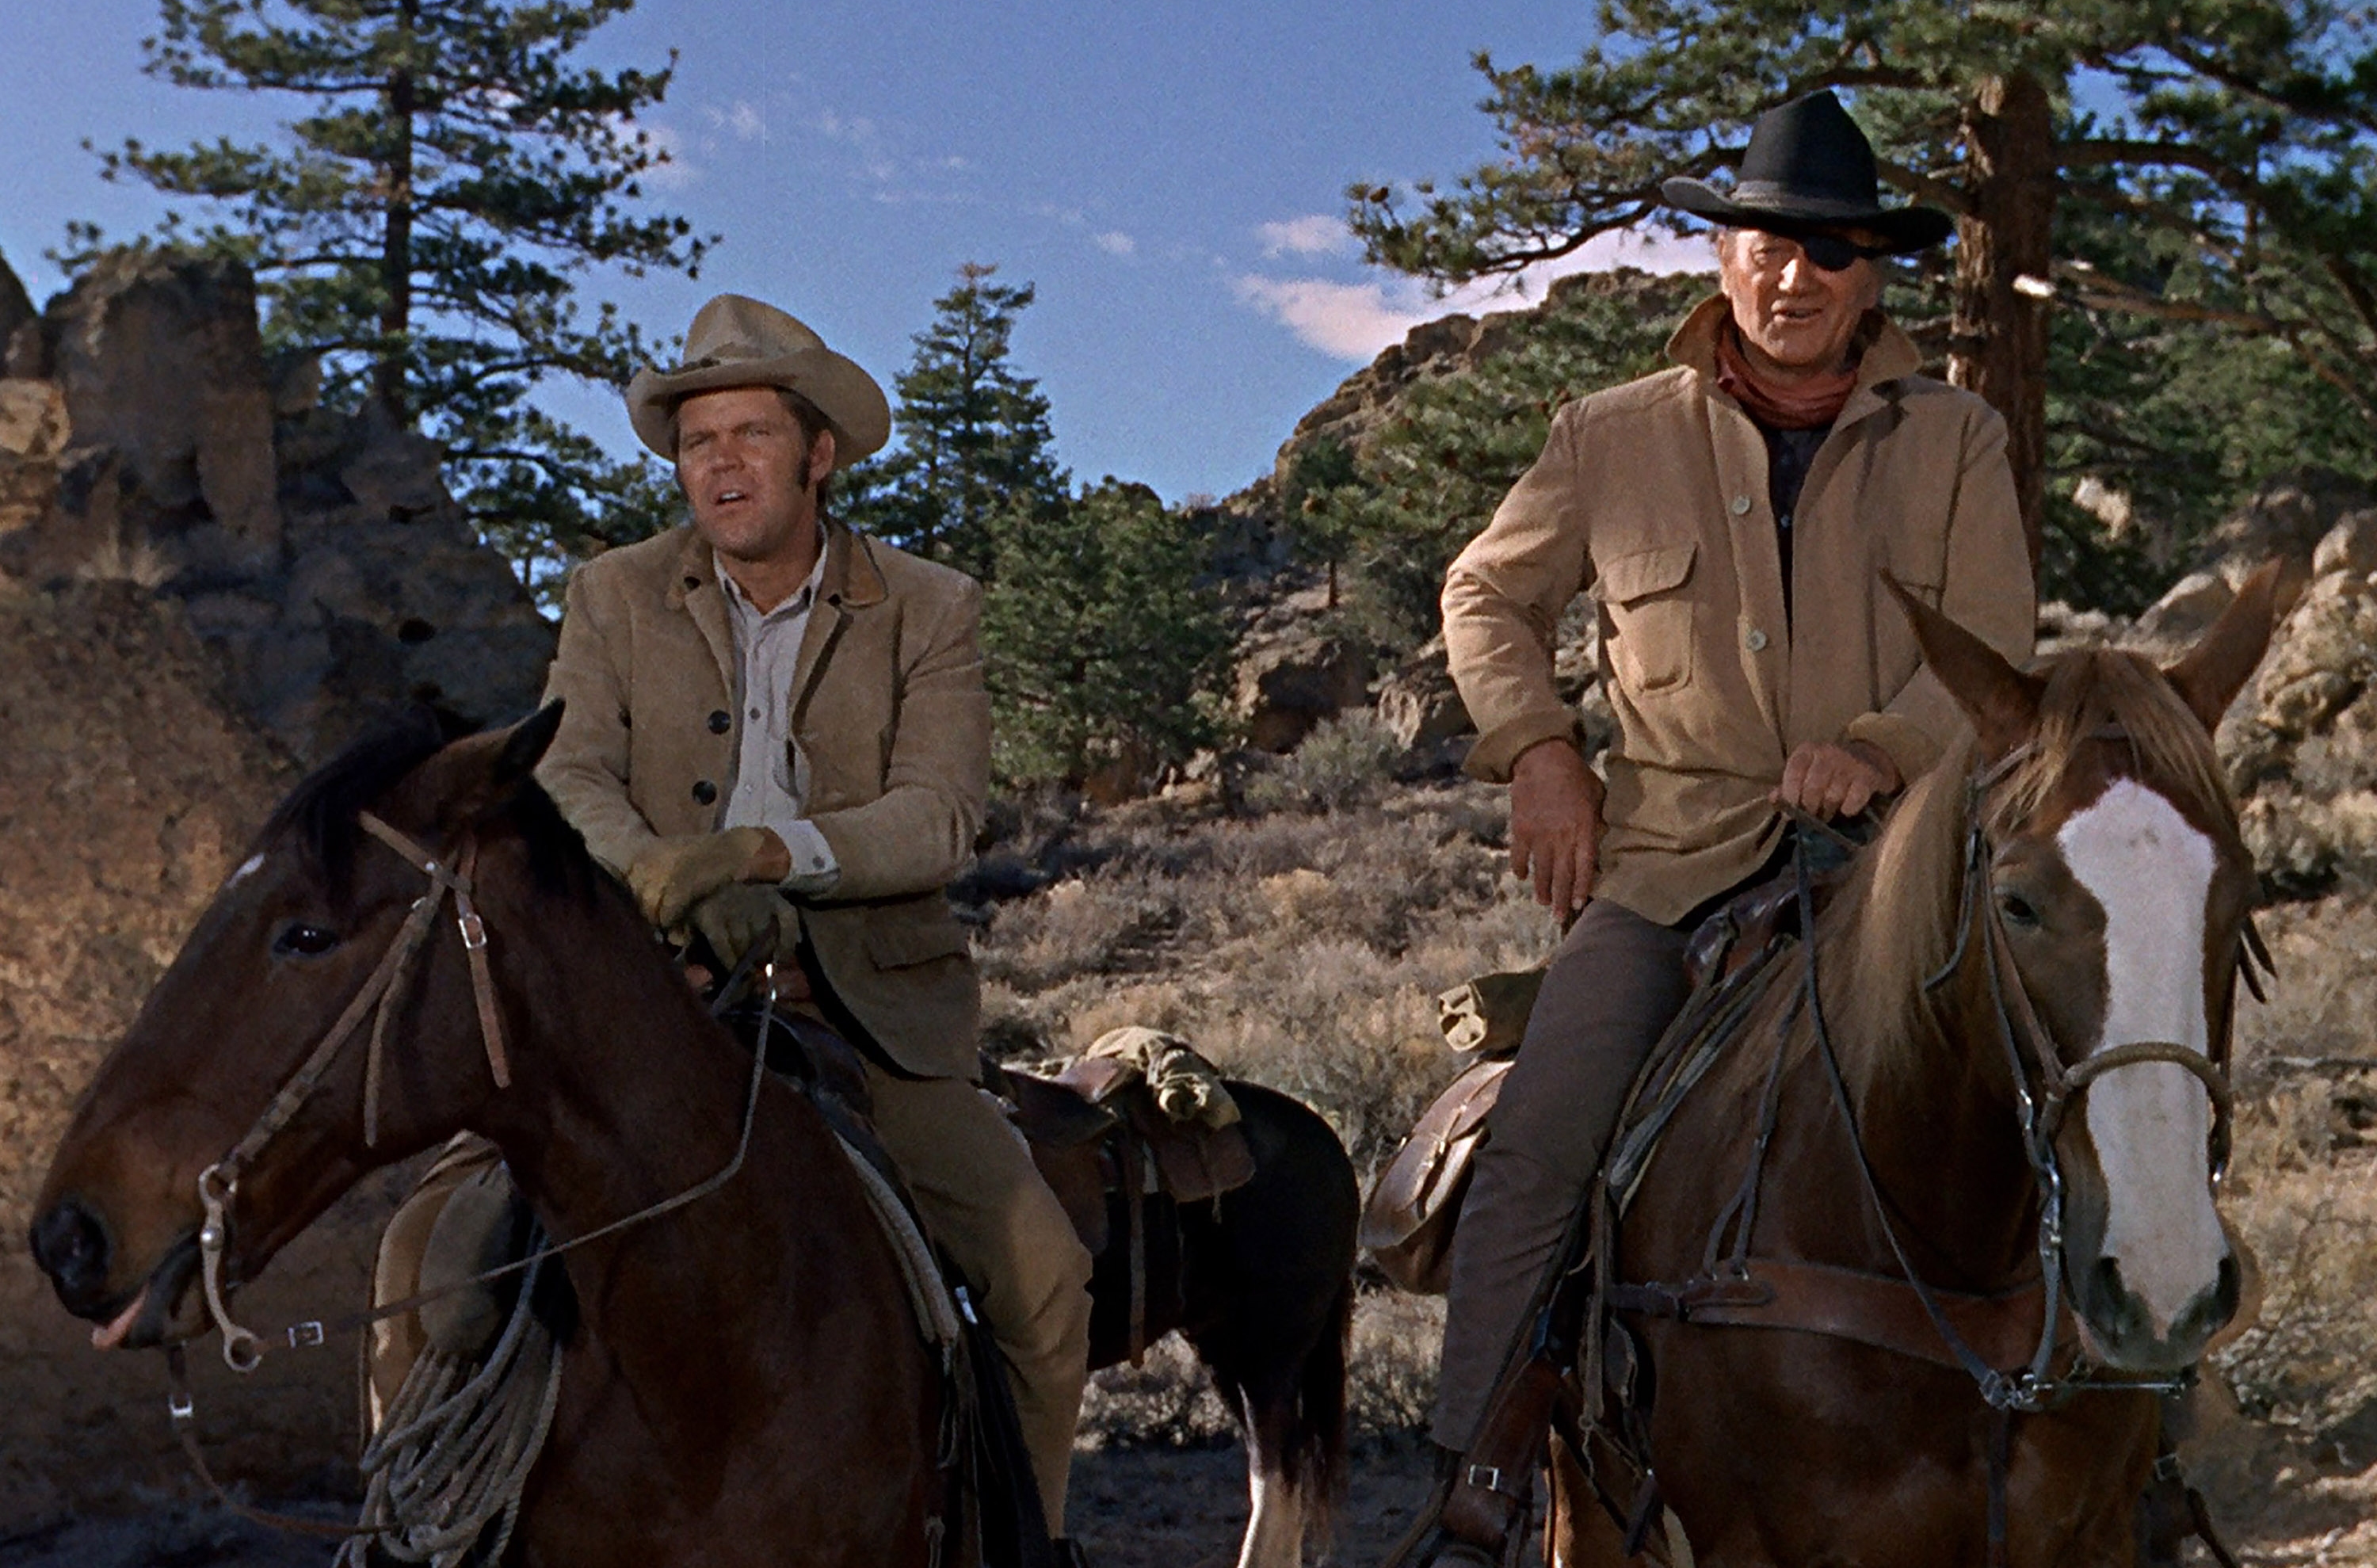 'True Grit' filming locations with Glen Campbell as La Boeuf and John Wayne as Rooster Cogburn one horseback wearing Western clothes in front of rocks and the mountain